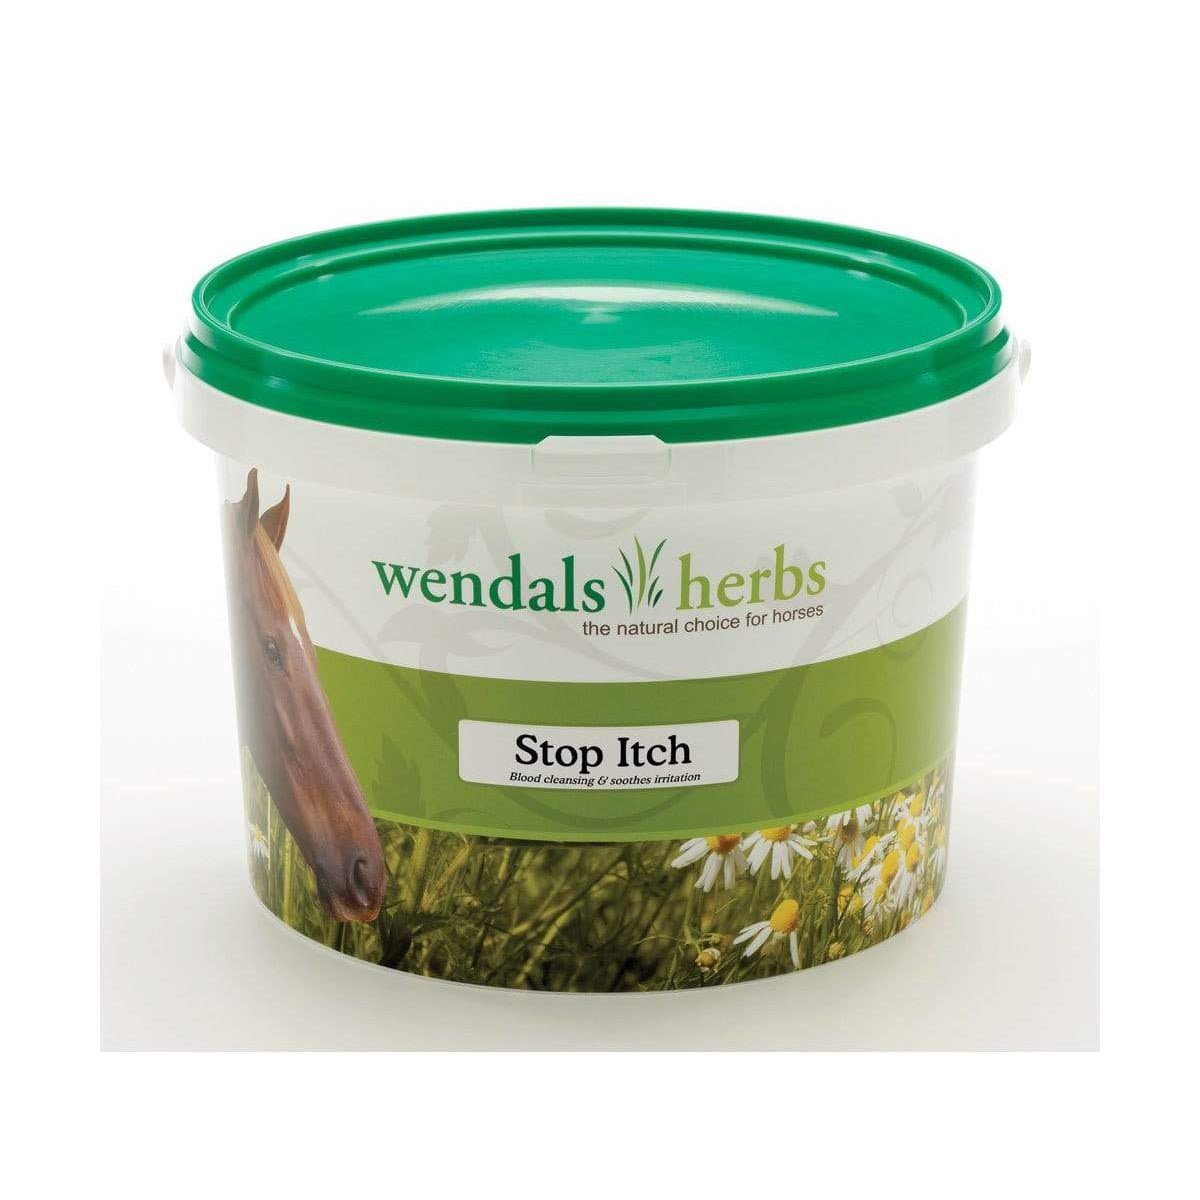 Wendals Herbs Stop Itch